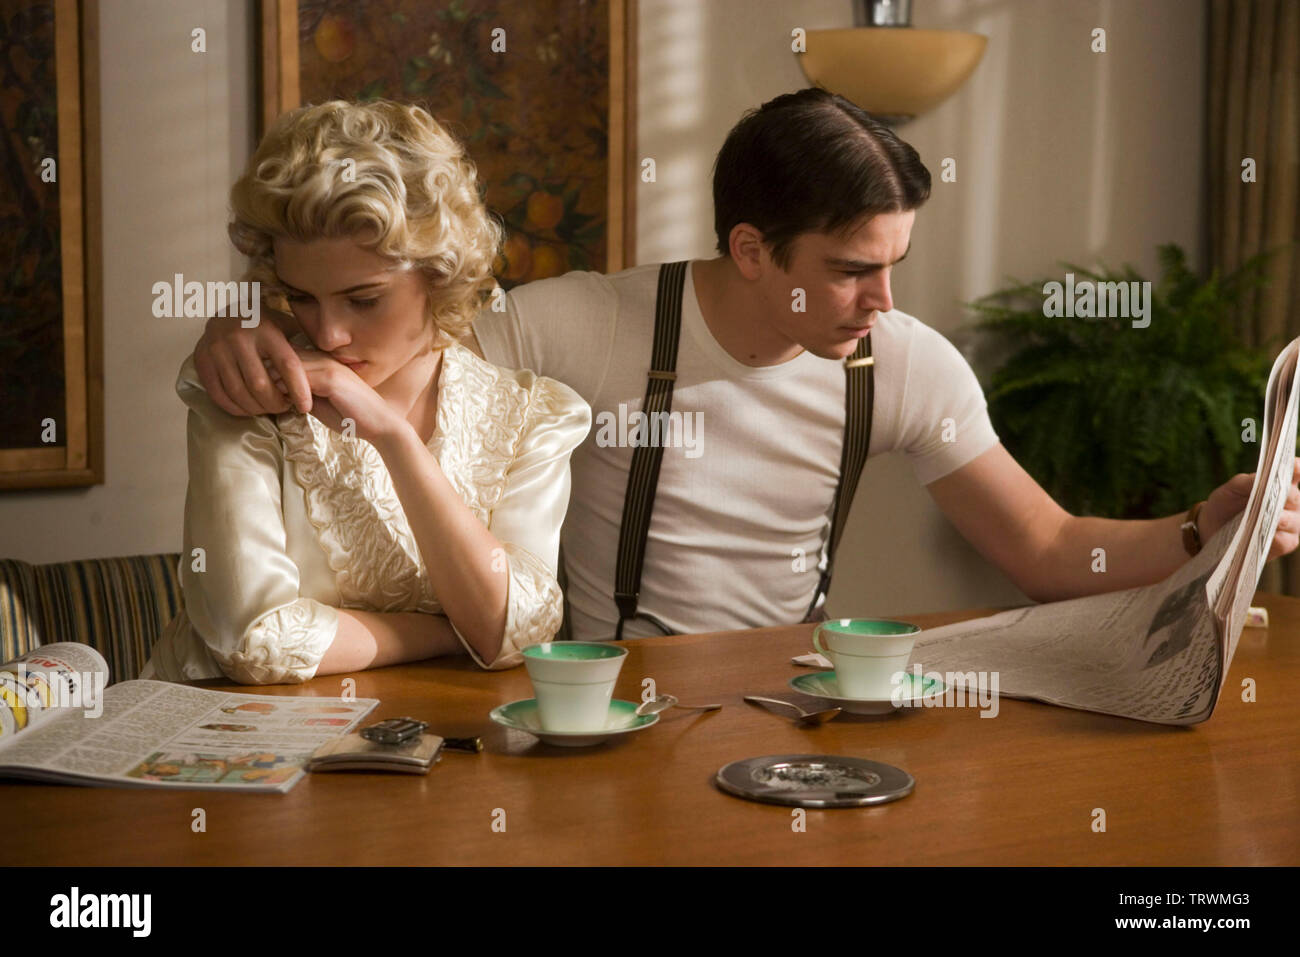 SCARLETT JOHANSSON and JOSH HARTNETT in THE BLACK DAHLIA (2006). Copyright: Editorial use only. No merchandising or book covers. This is a publicly distributed handout. Access rights only, no license of copyright provided. Only to be reproduced in conjunction with promotion of this film. Credit: UNIVERSAL PICTURES / KONOW, ROLF / Album Stock Photo